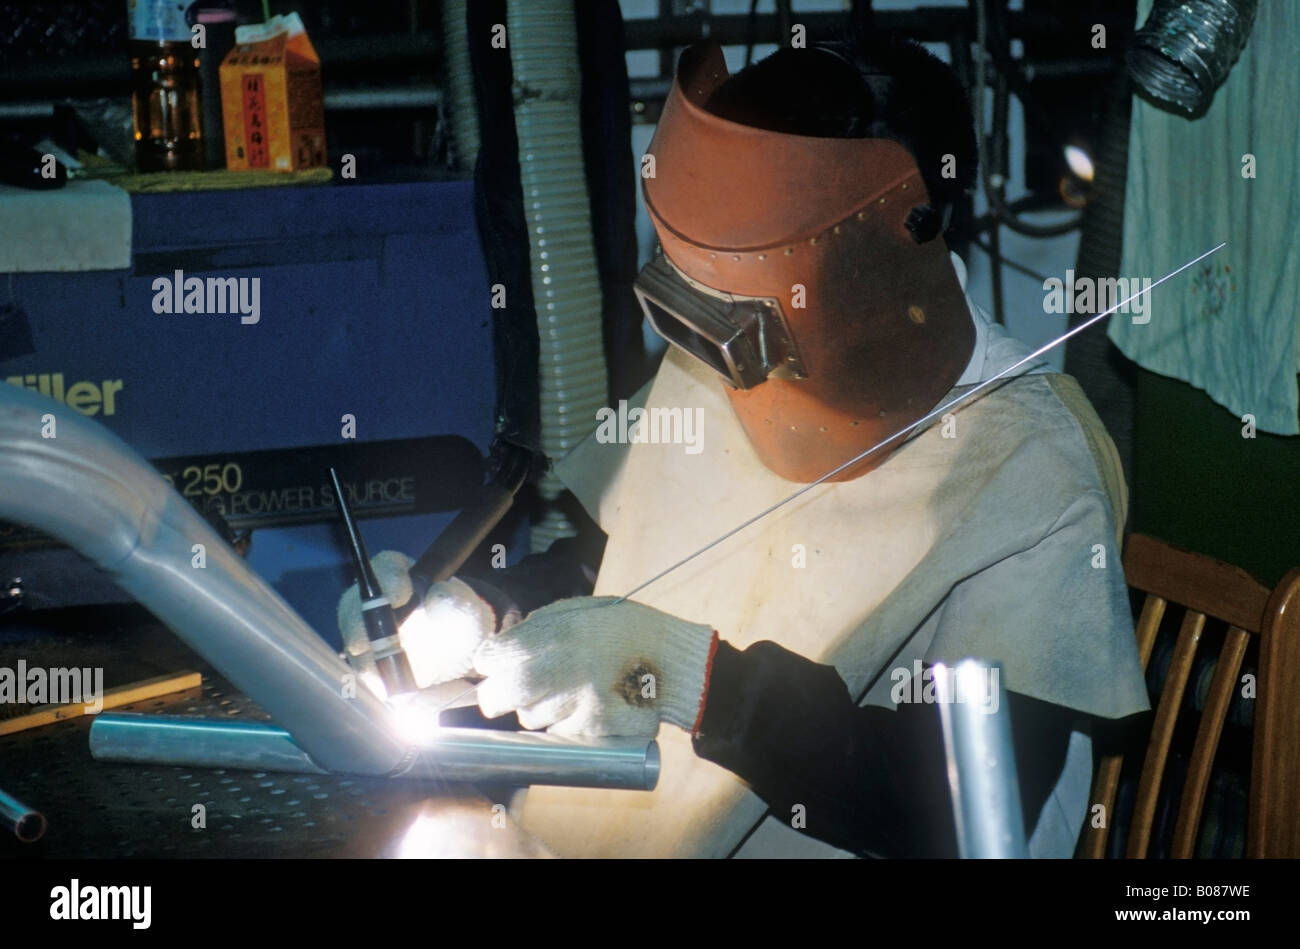 Man Welding And Manufacturing A Bicycle Frame Taiwan Stock Photo